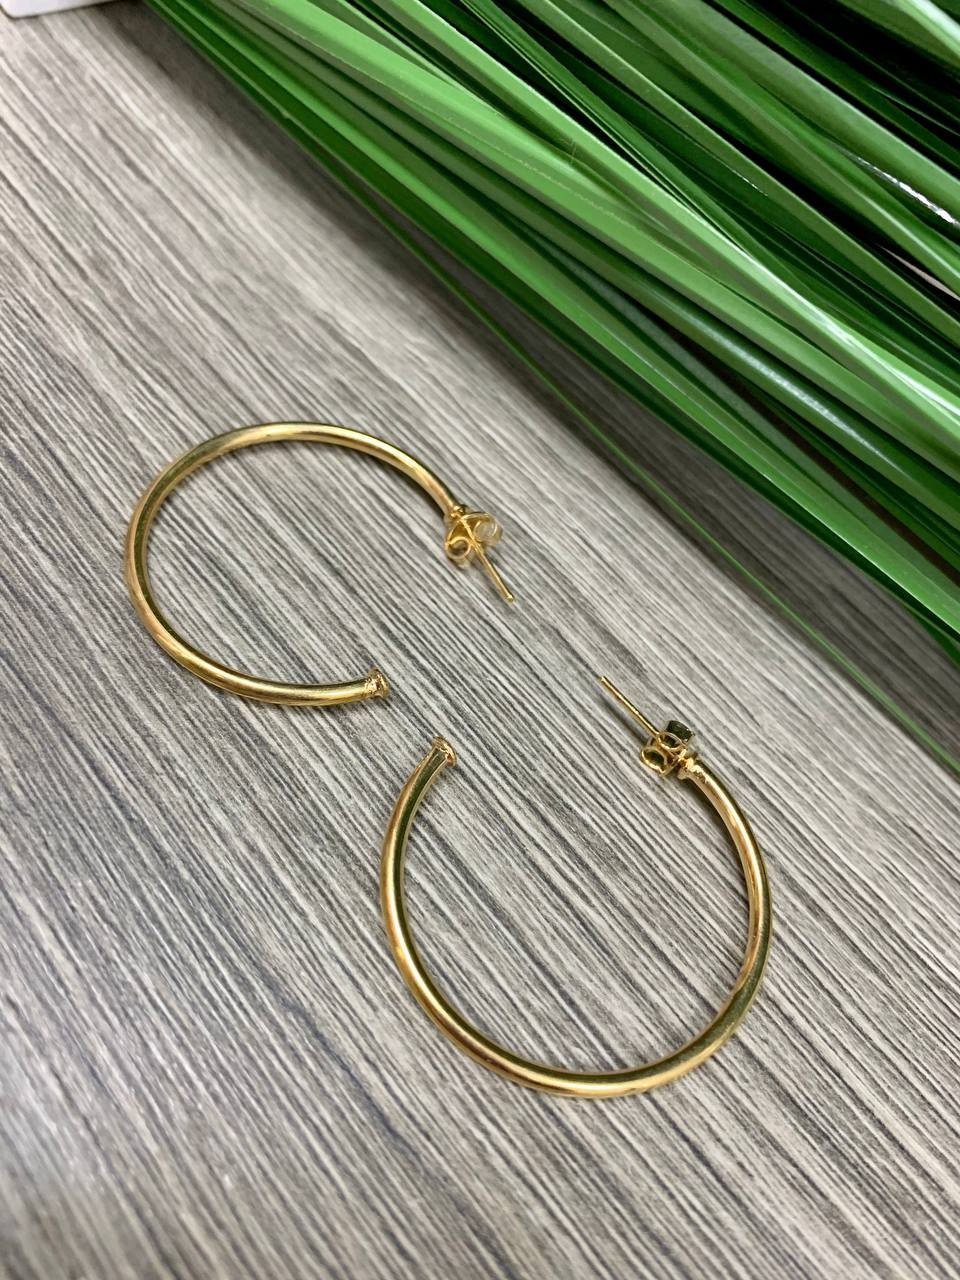 18k Gold Filled Fancy Circle Barbell C Earrings Wholesale Jewelry Supplies